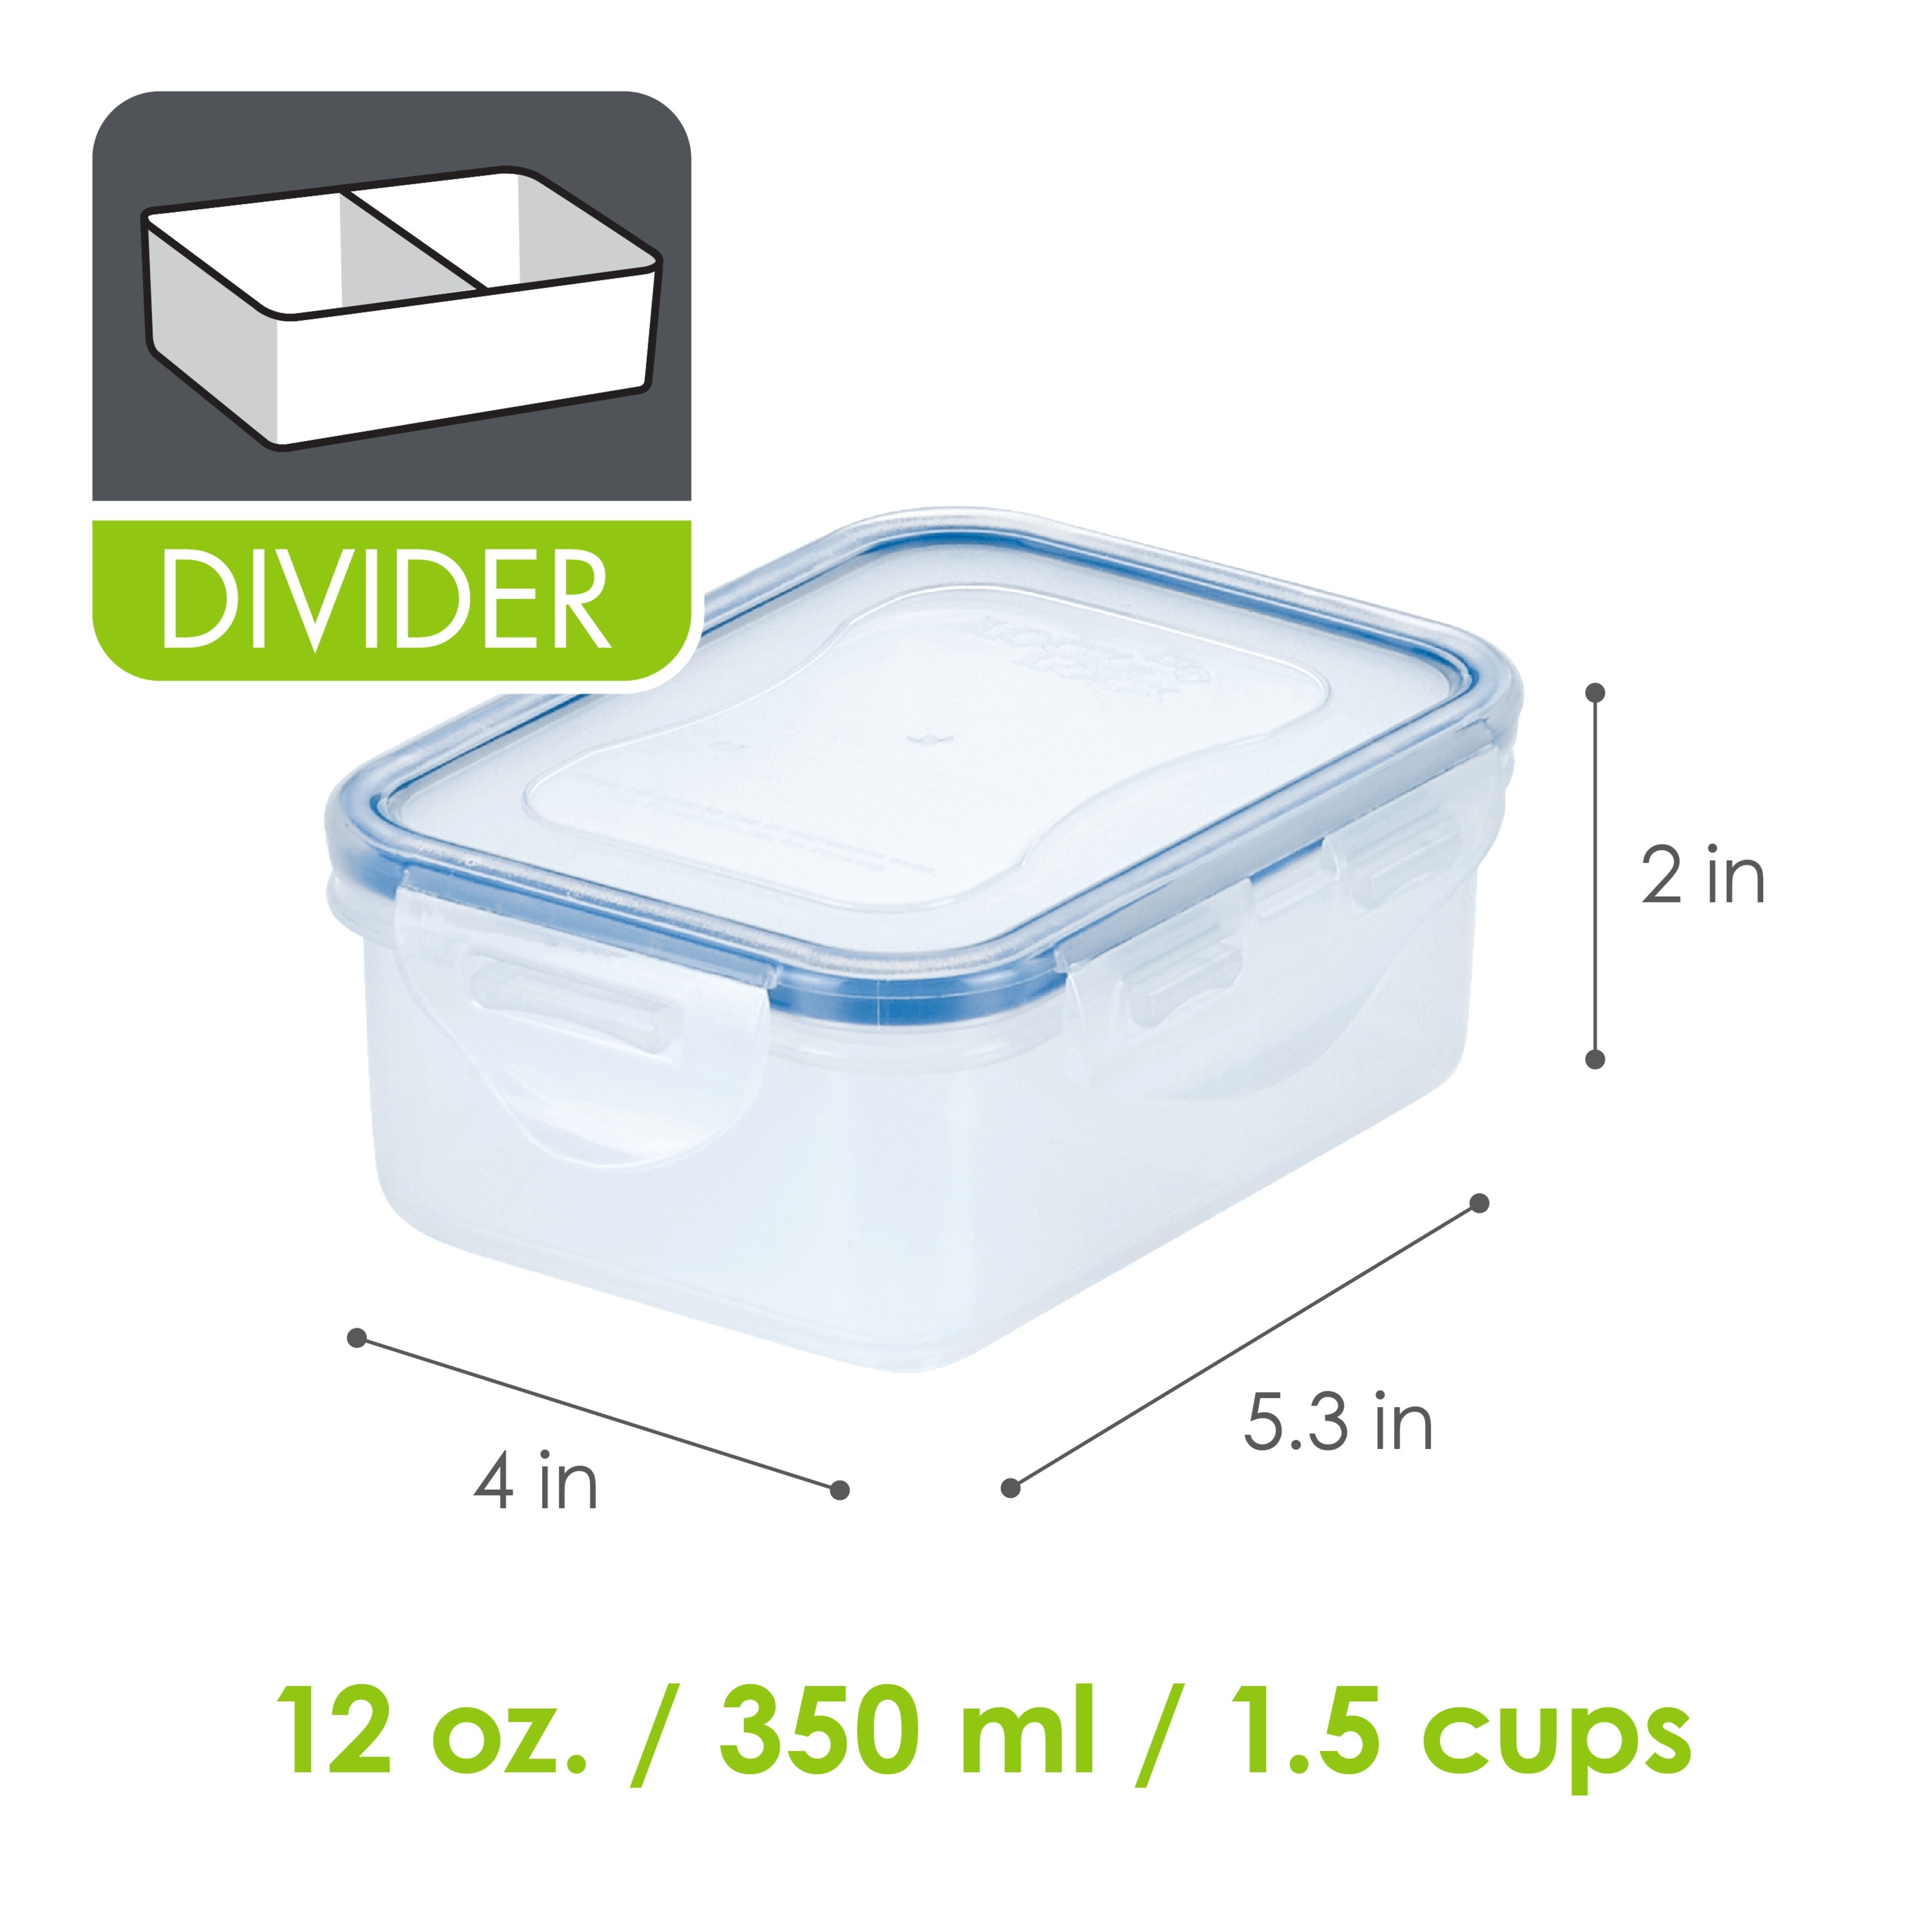 https://ak1.ostkcdn.com/images/products/is/images/direct/b0fac5e888010fa78ffc2d3f6e7c5699692cc3dc/Easy-Essentials-Divided-Rectangular-Container%2C-12-oz%2C-Set-of-6.jpg